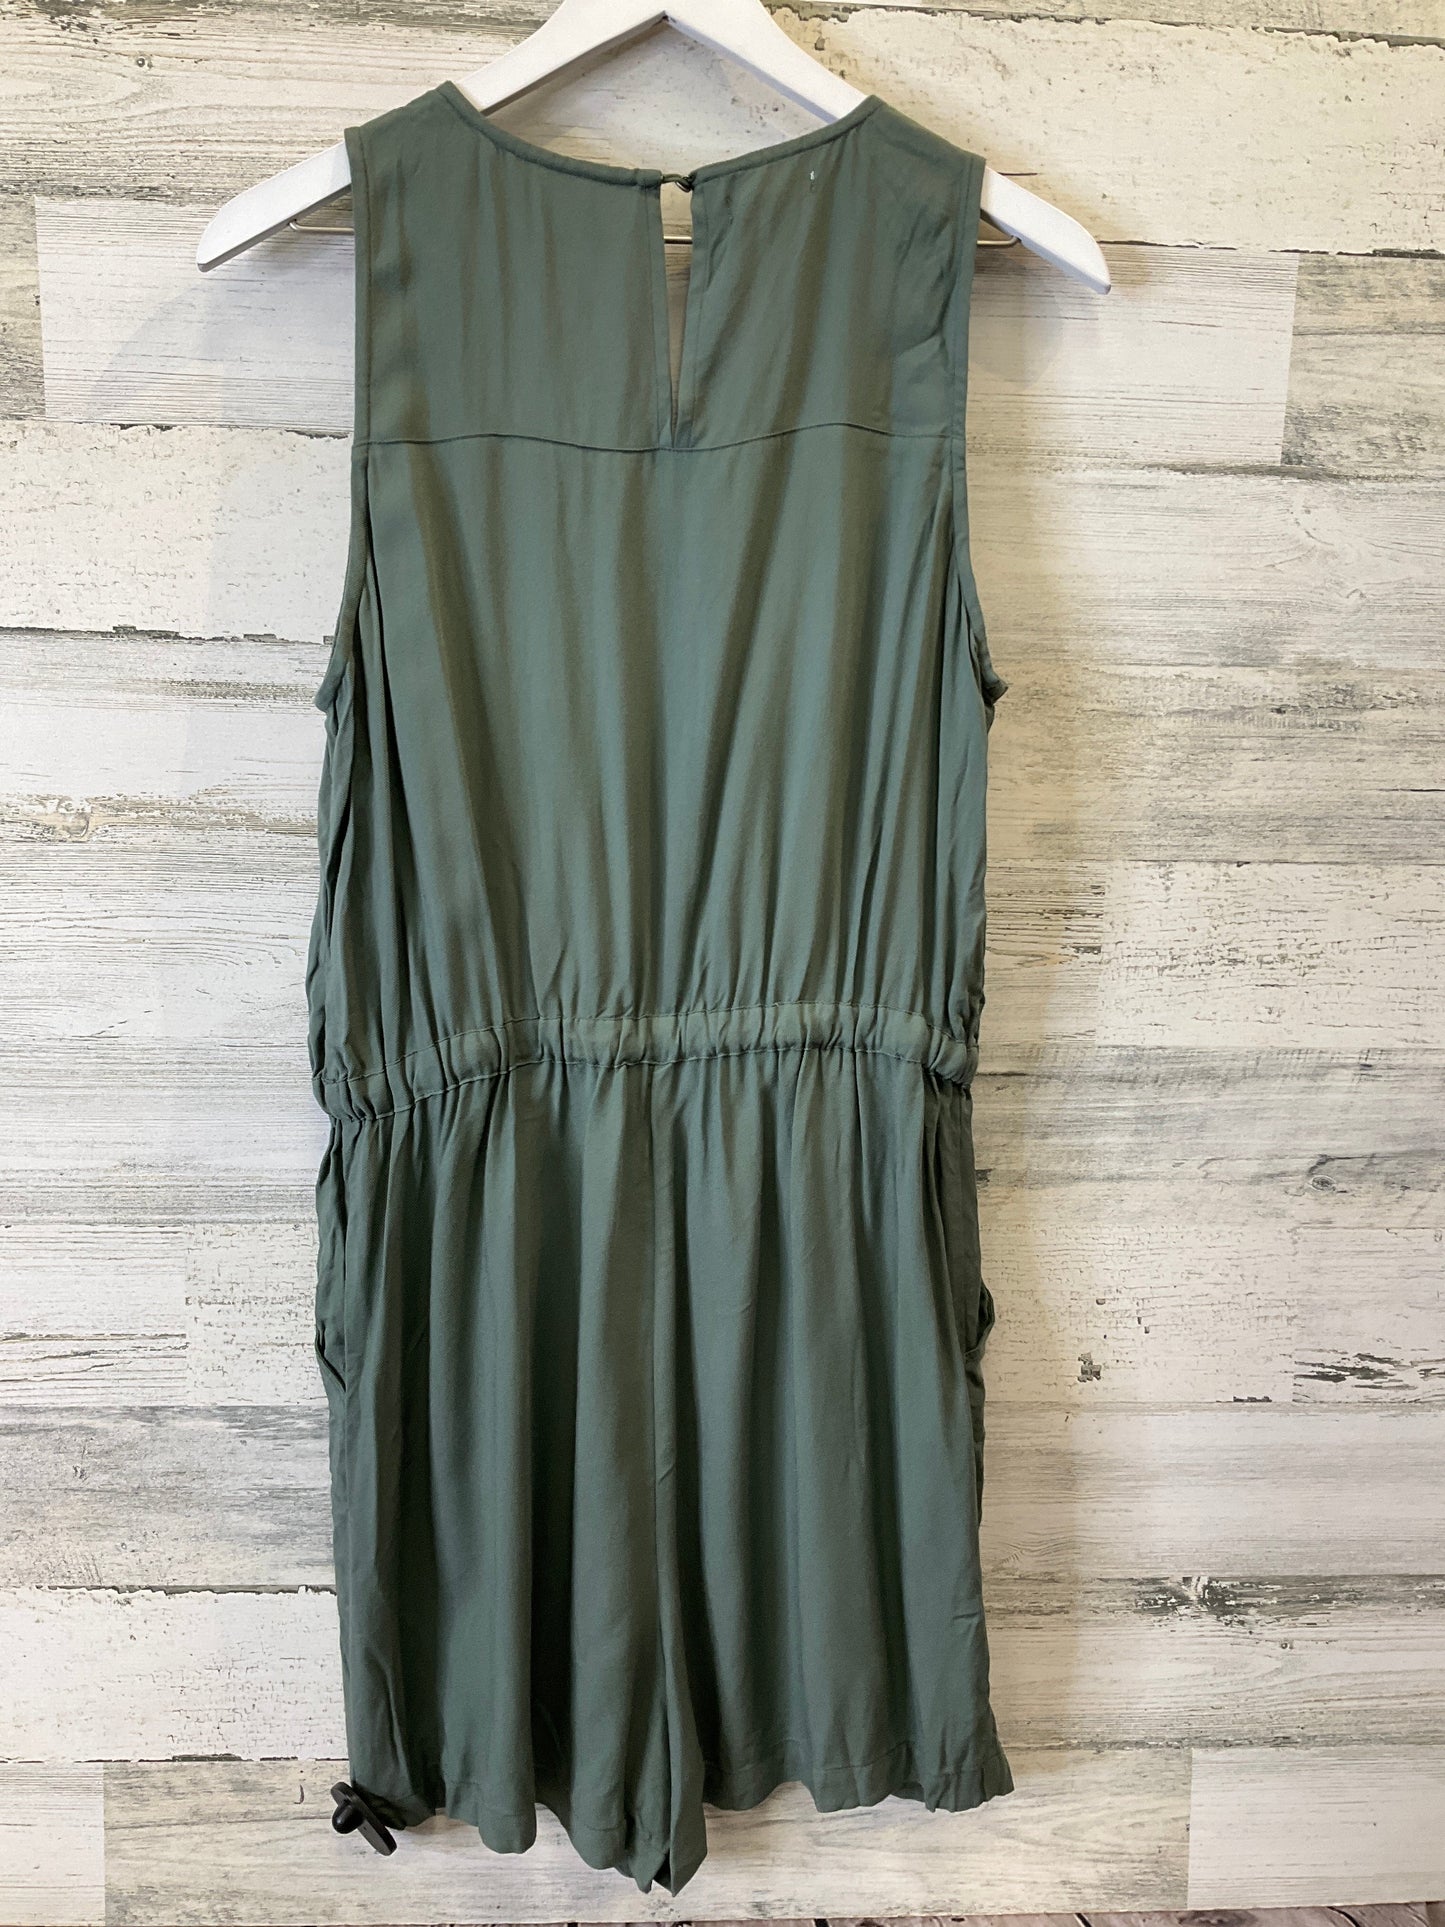 Green Romper Maurices, Size M